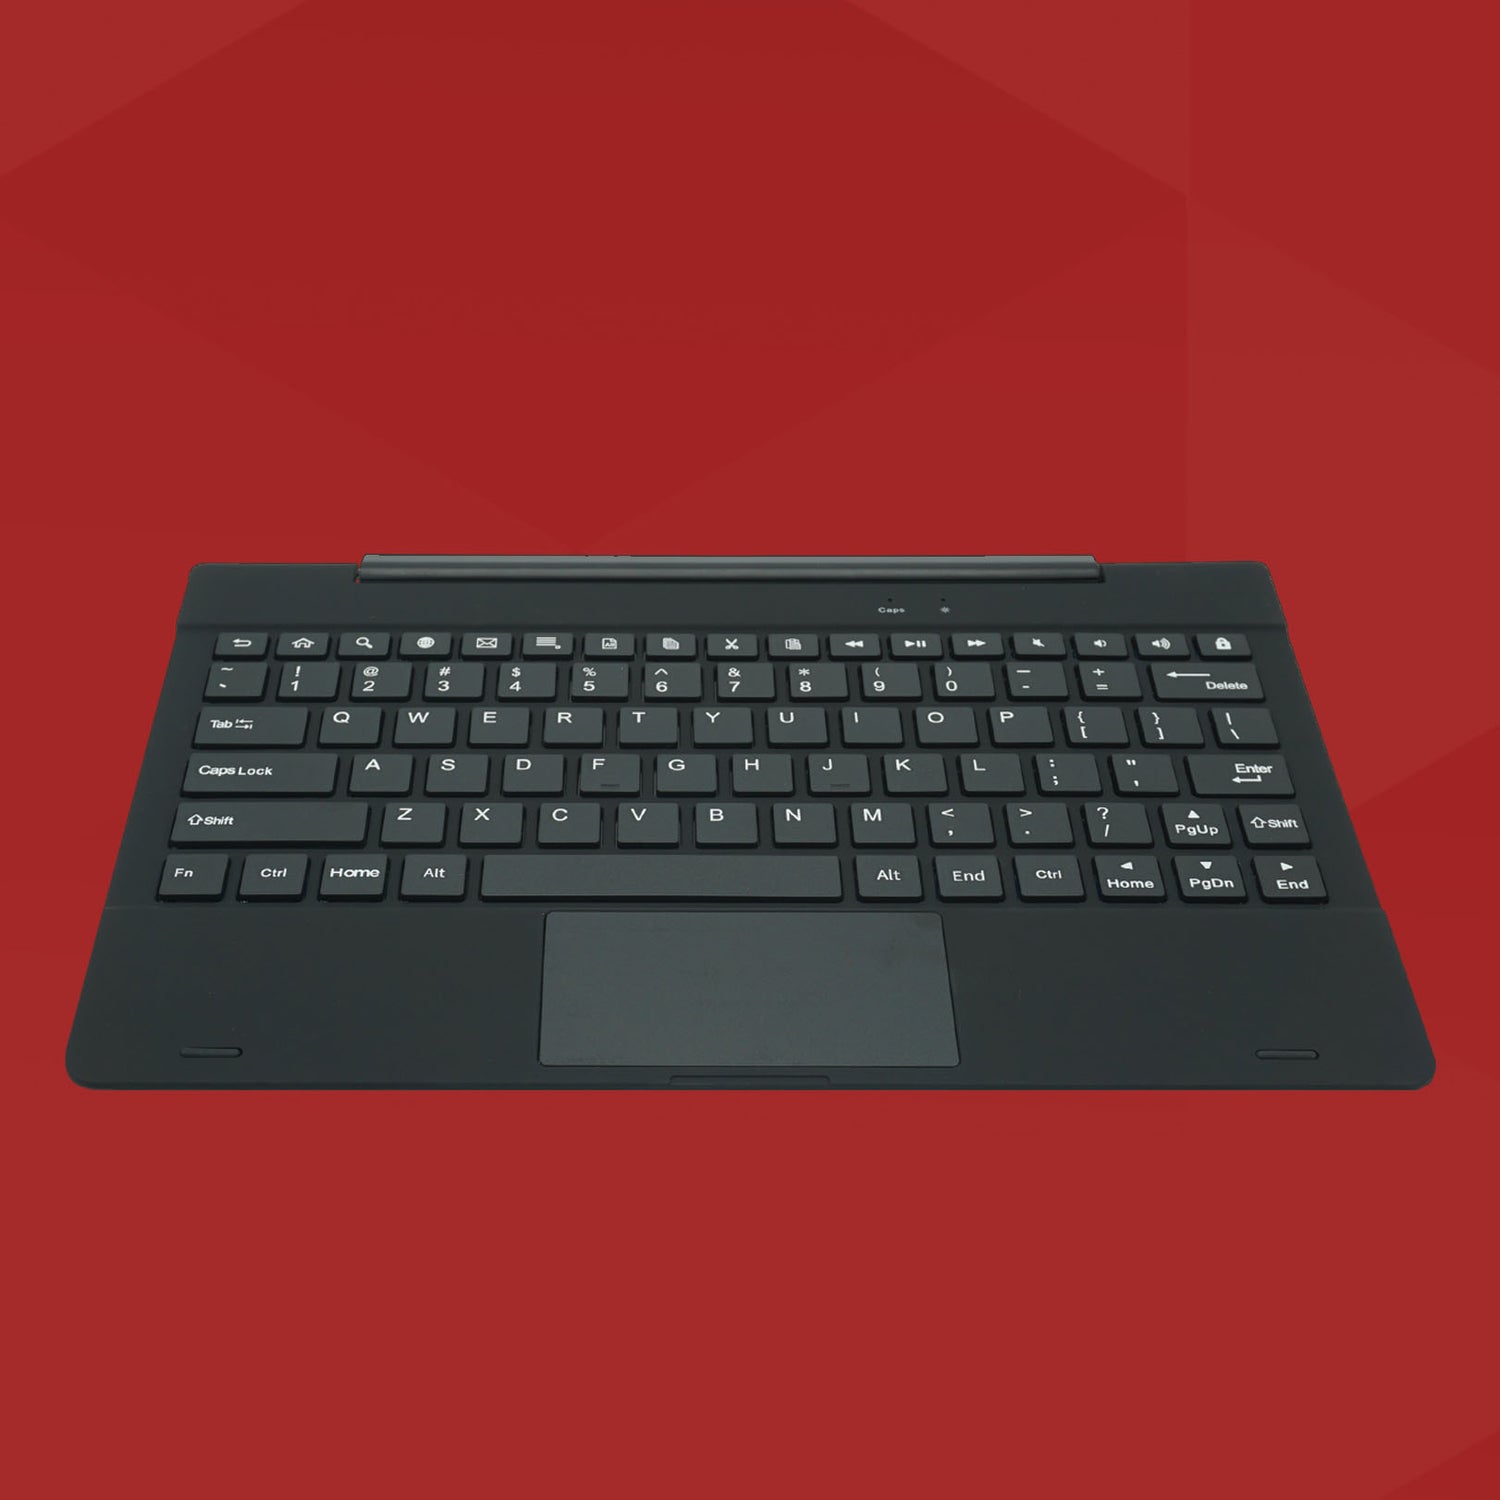 Detachable Keyboard for a better typing experience | Simbans TangoTab 10 Inch Tablet with Detachable Keyboard